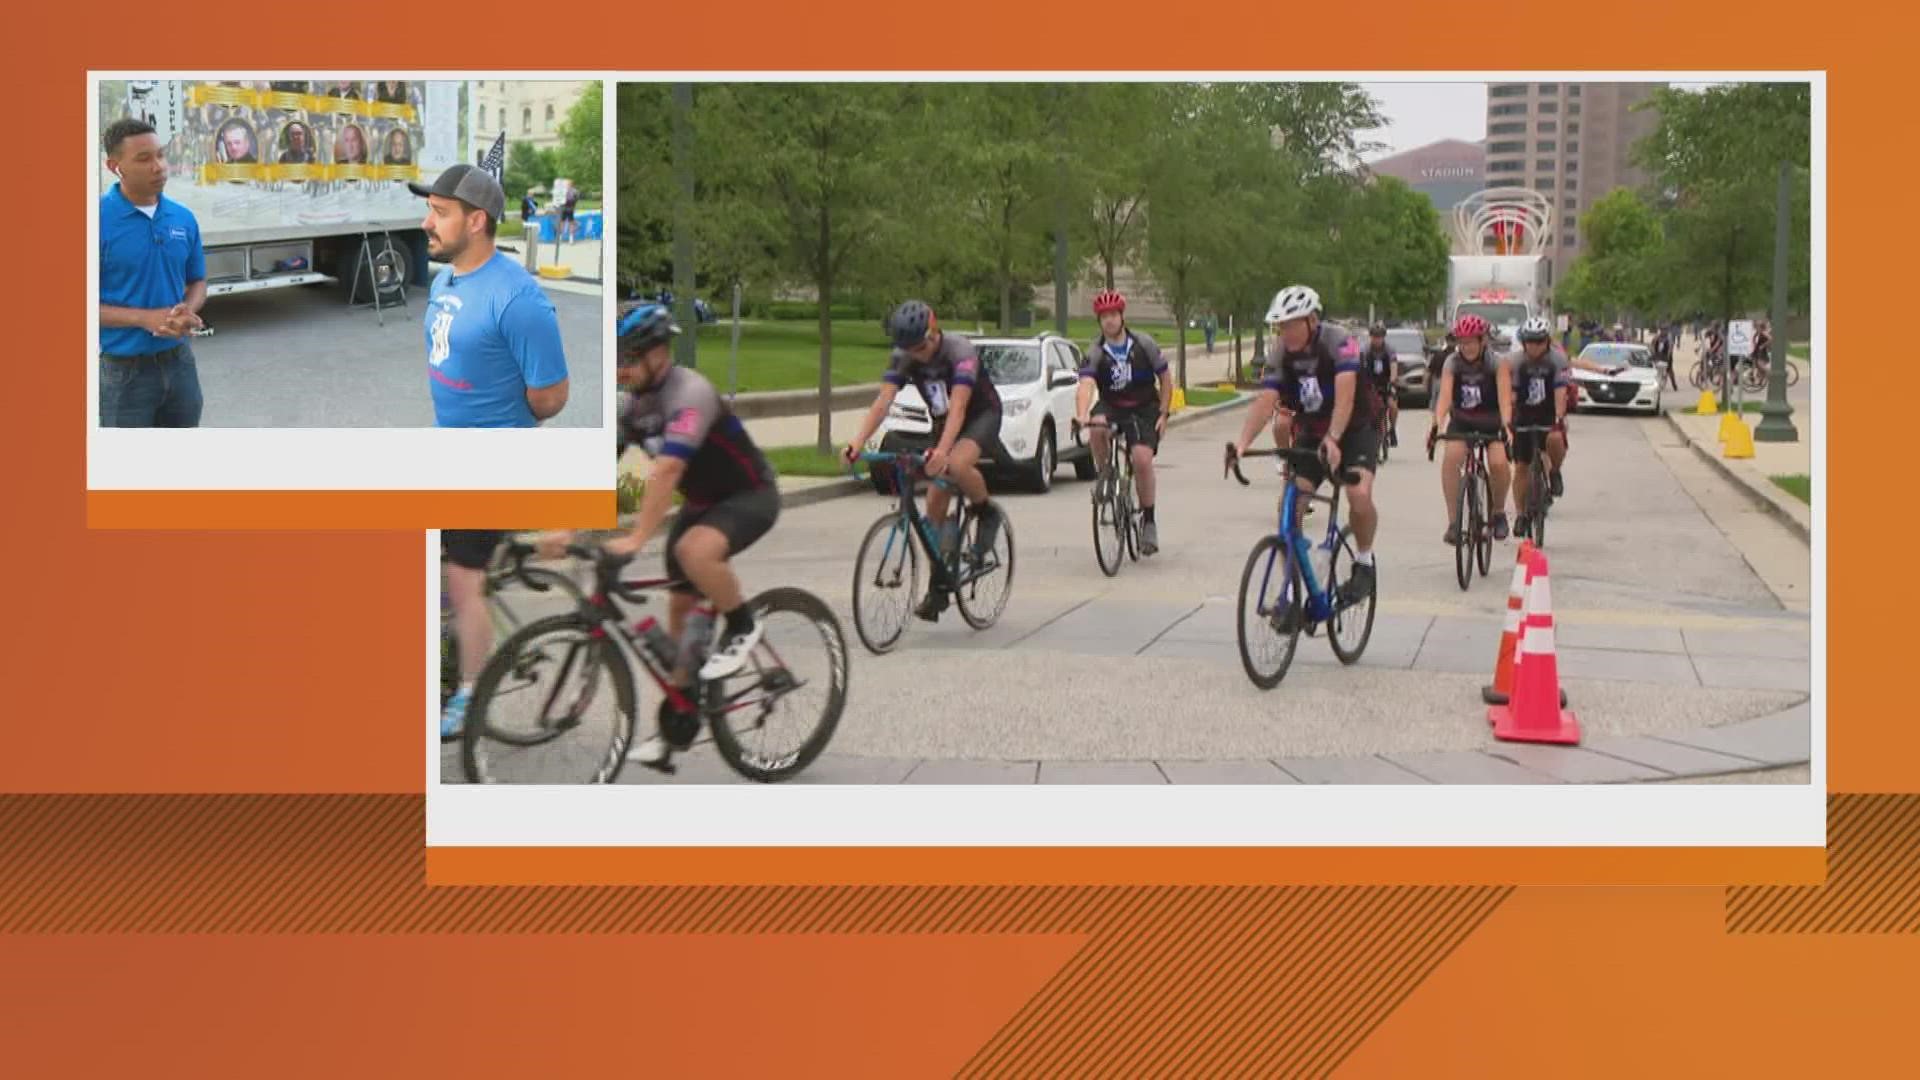 This morning, dozens of officers from across Indiana will be heading out on a 13-day ride across the state.